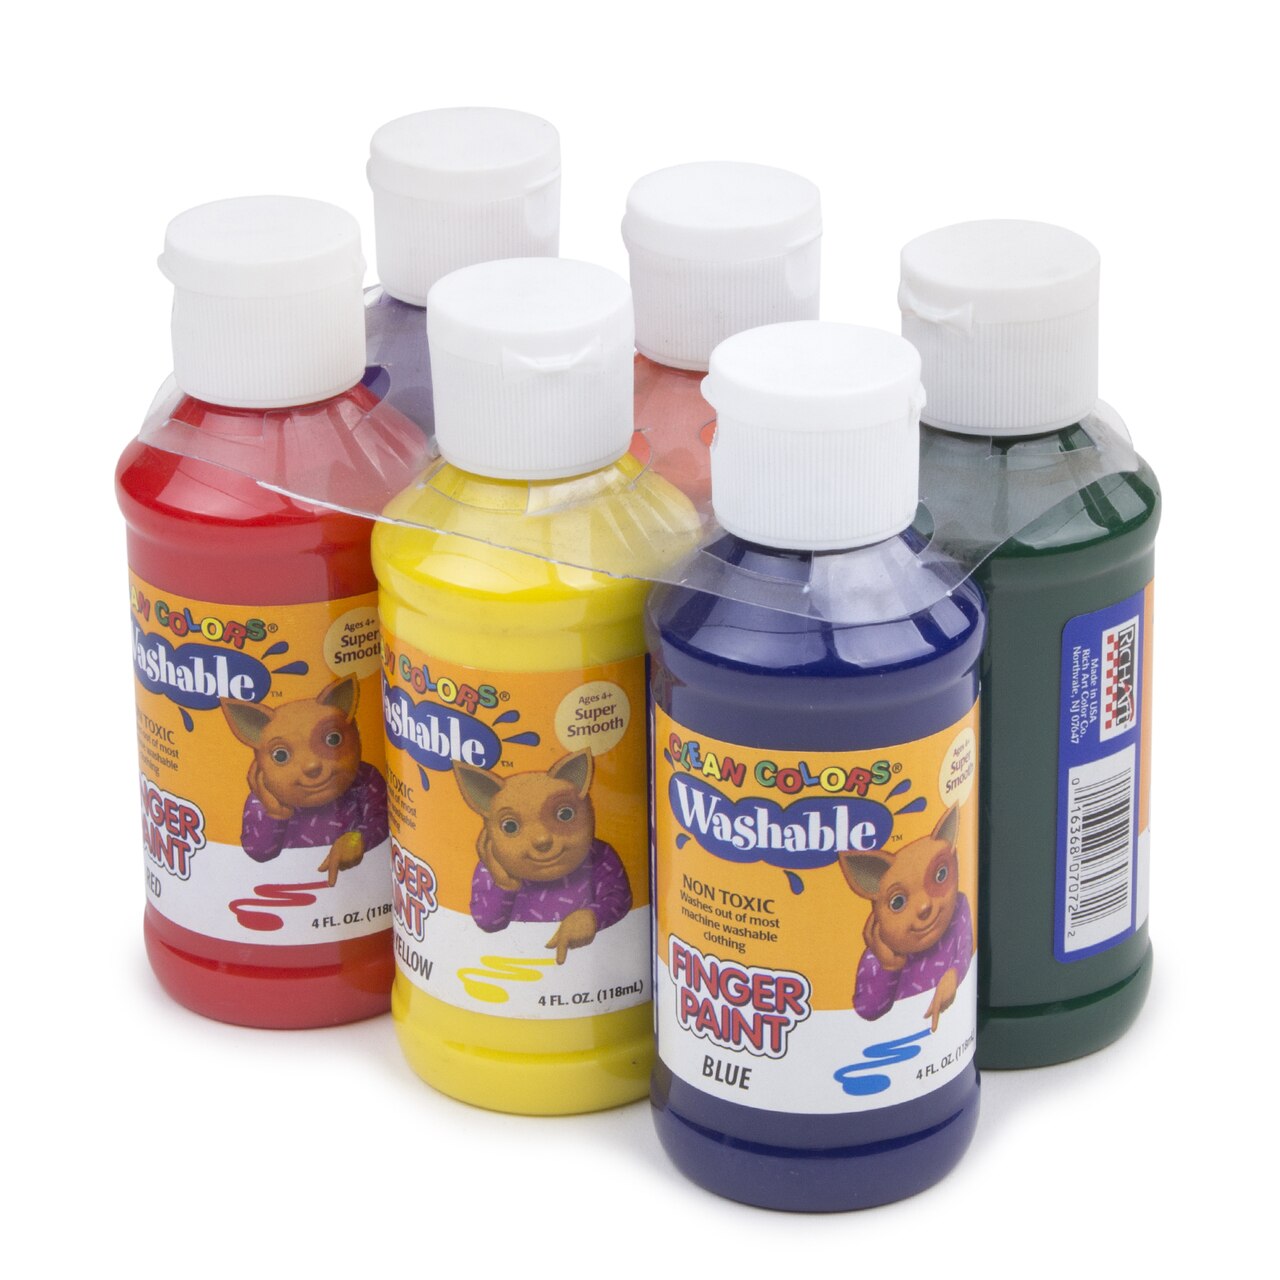 Colorations Washable Kids Glitter Paint Set - 4 oz (Pack of 6) - Non-Toxic  and Easy to Clean